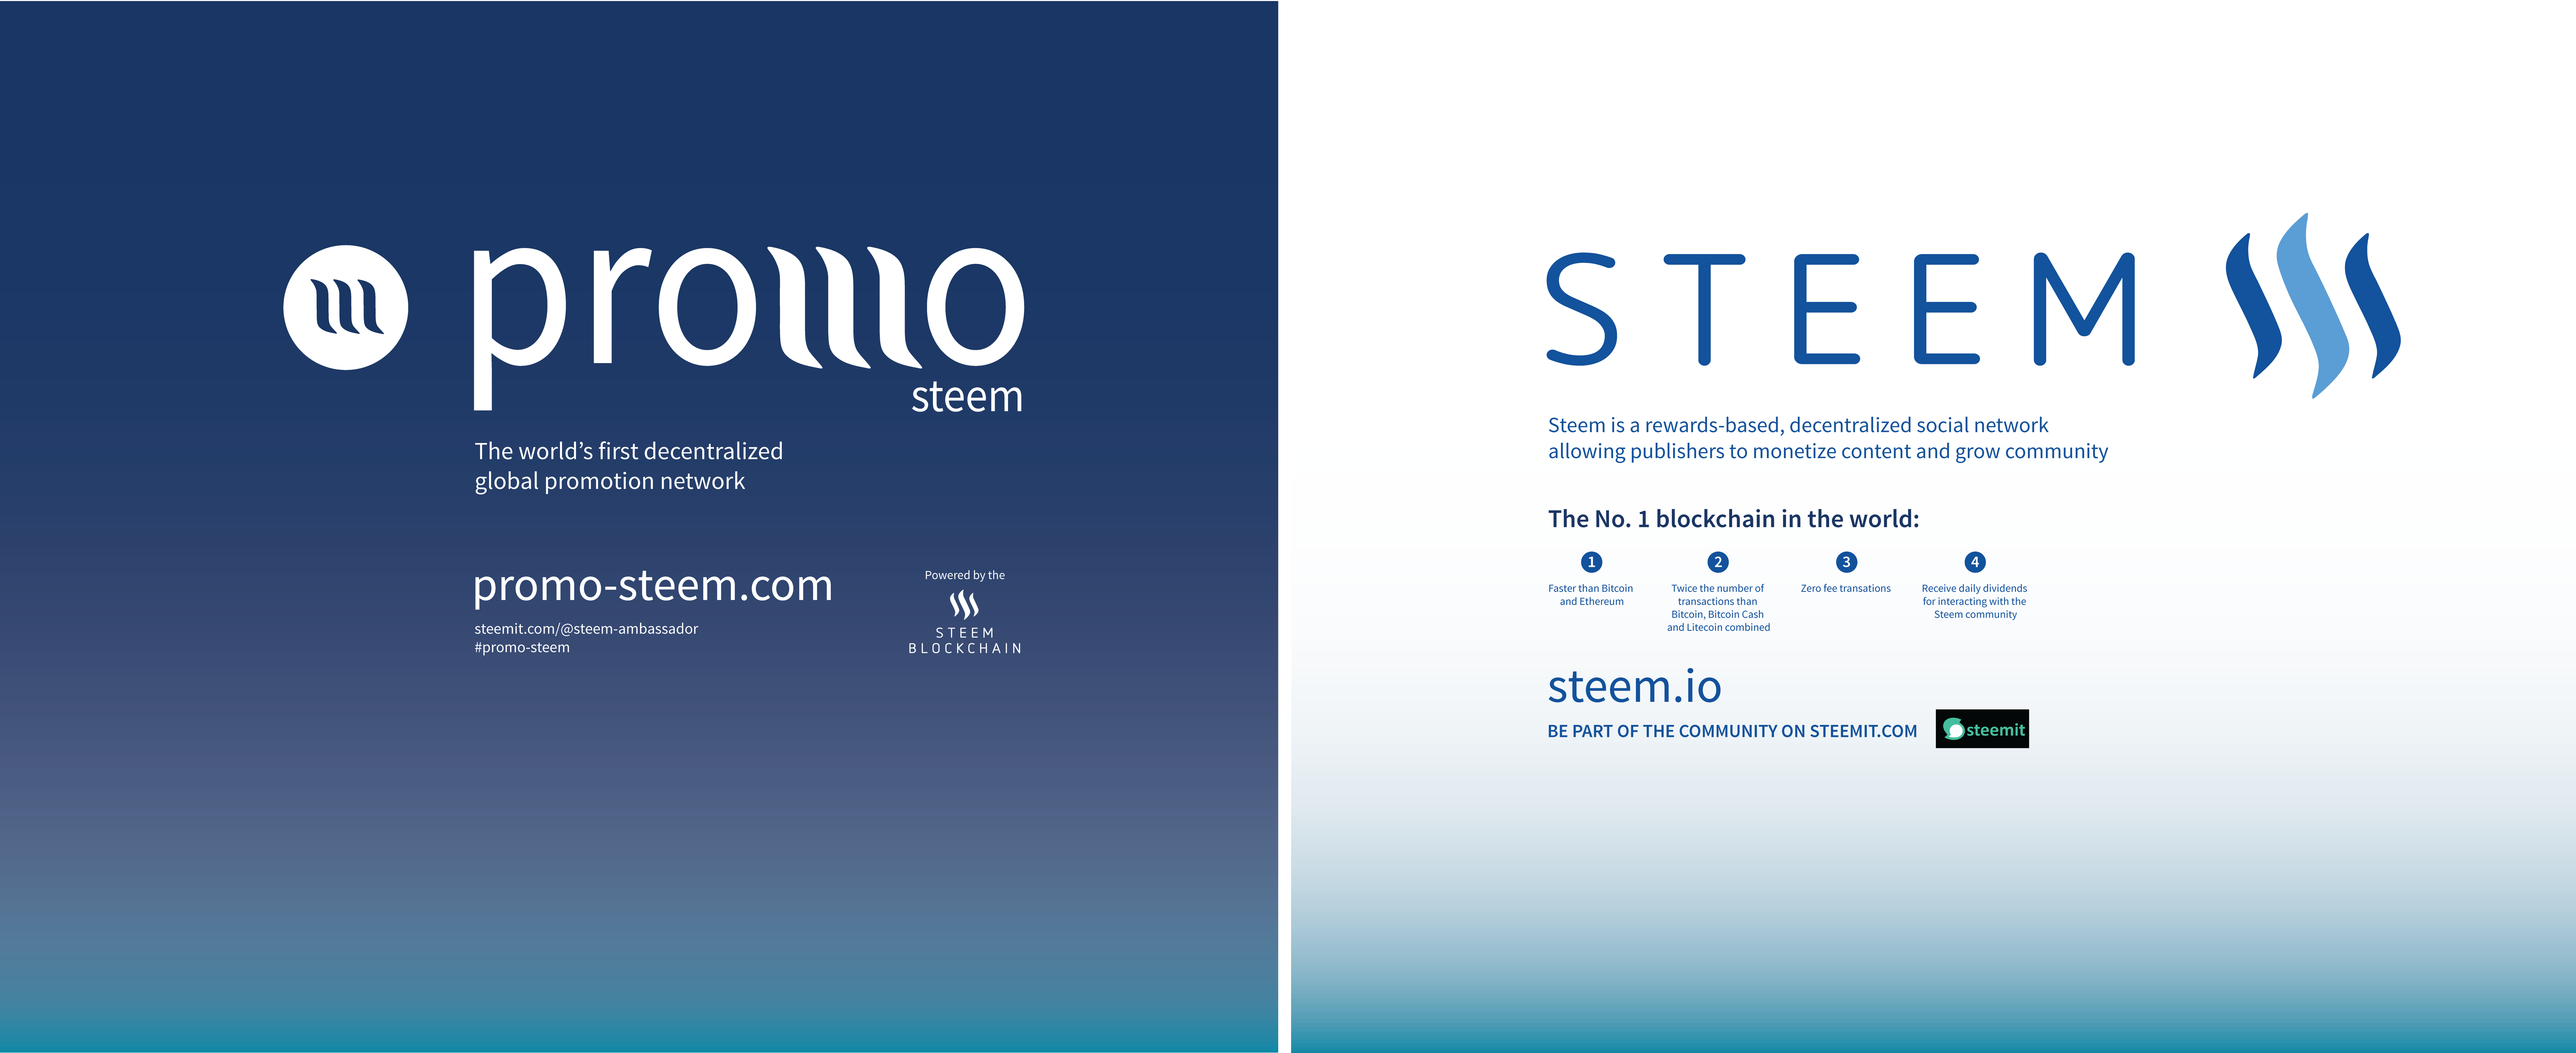 exhibition stand promo steem joined.png